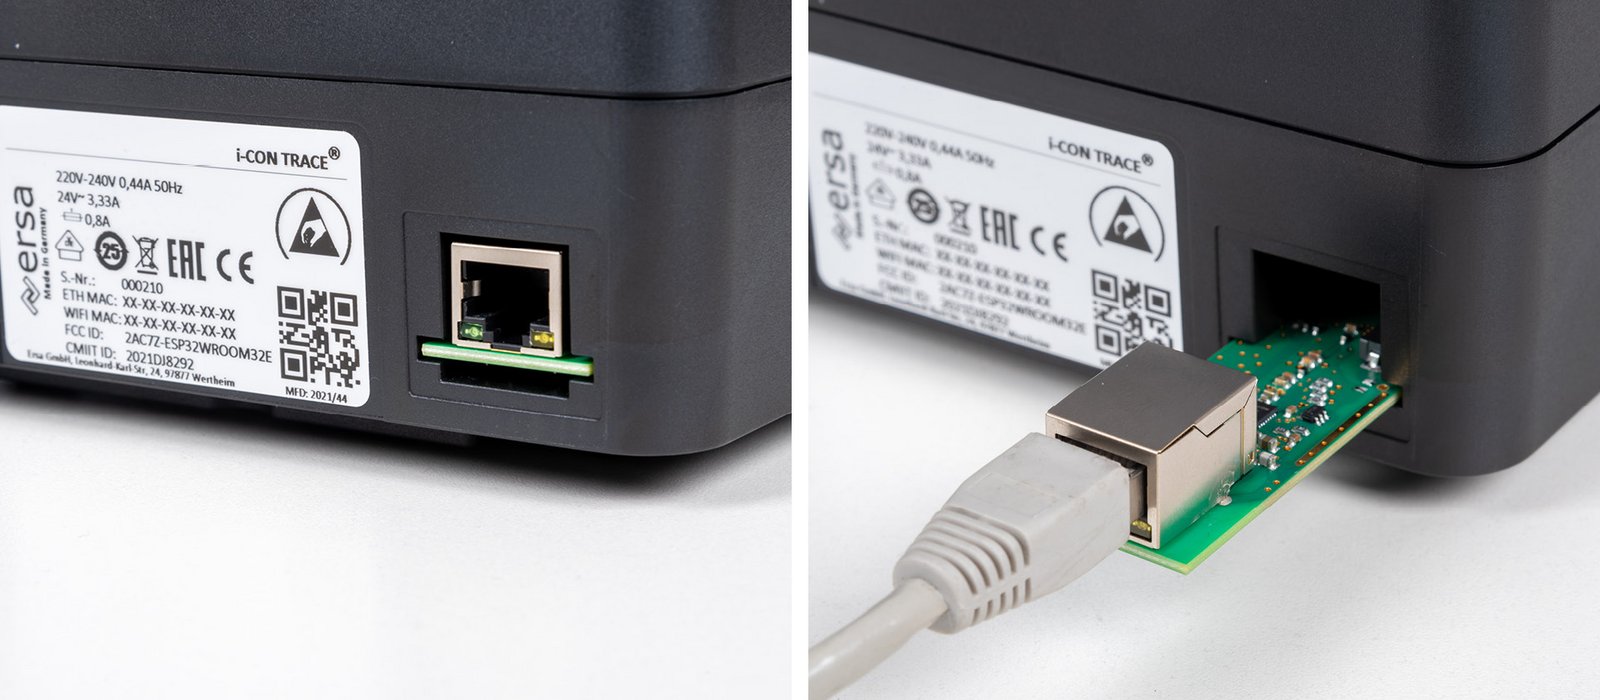 Sets standards in connectivity and operating concept: i-CON TRACE with WiFi and retrofittable LAN adaptor